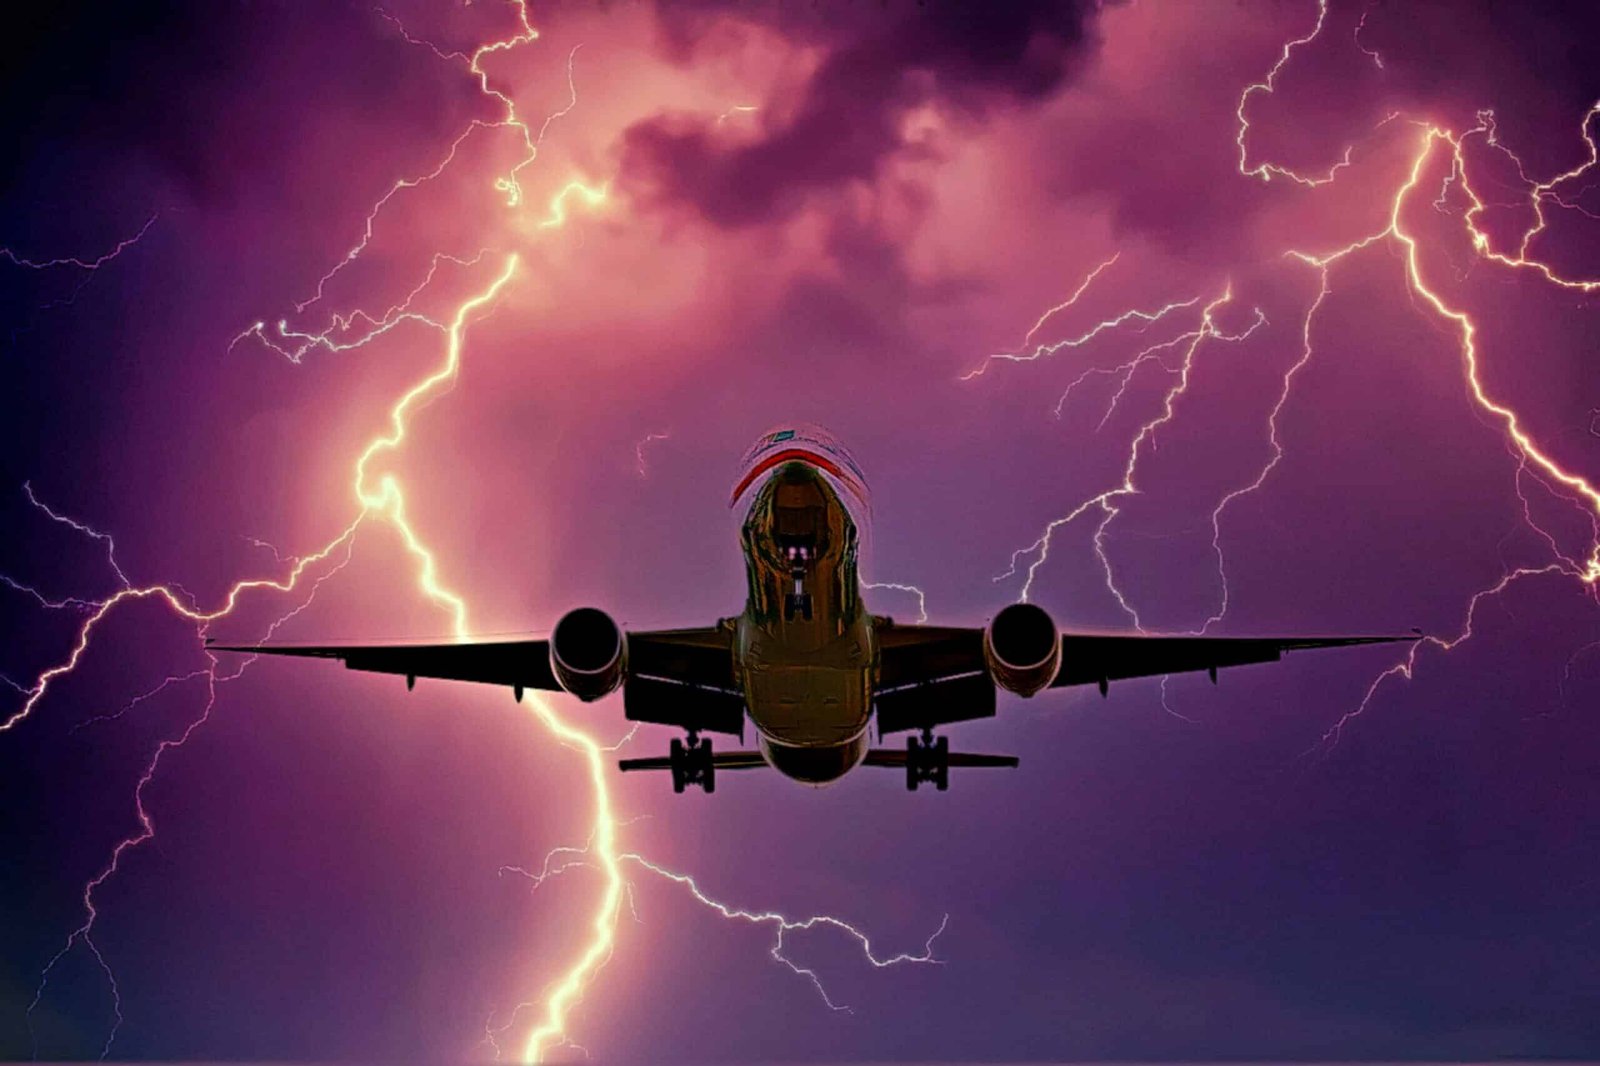 Can Planes Fly in thunderstorm